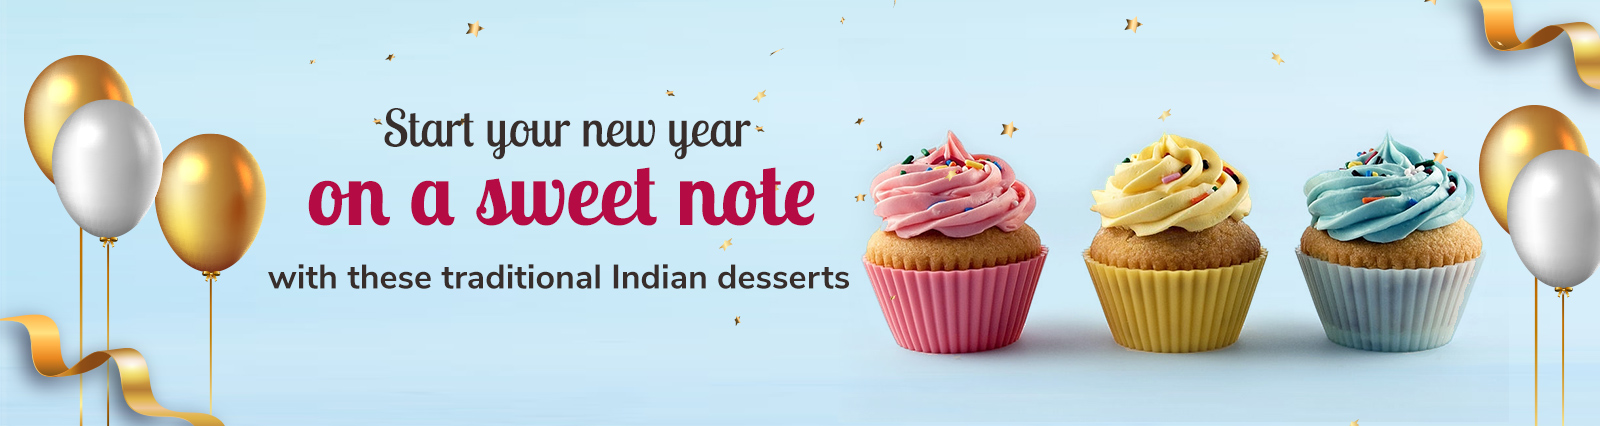 New Year Special Desserts Recipe